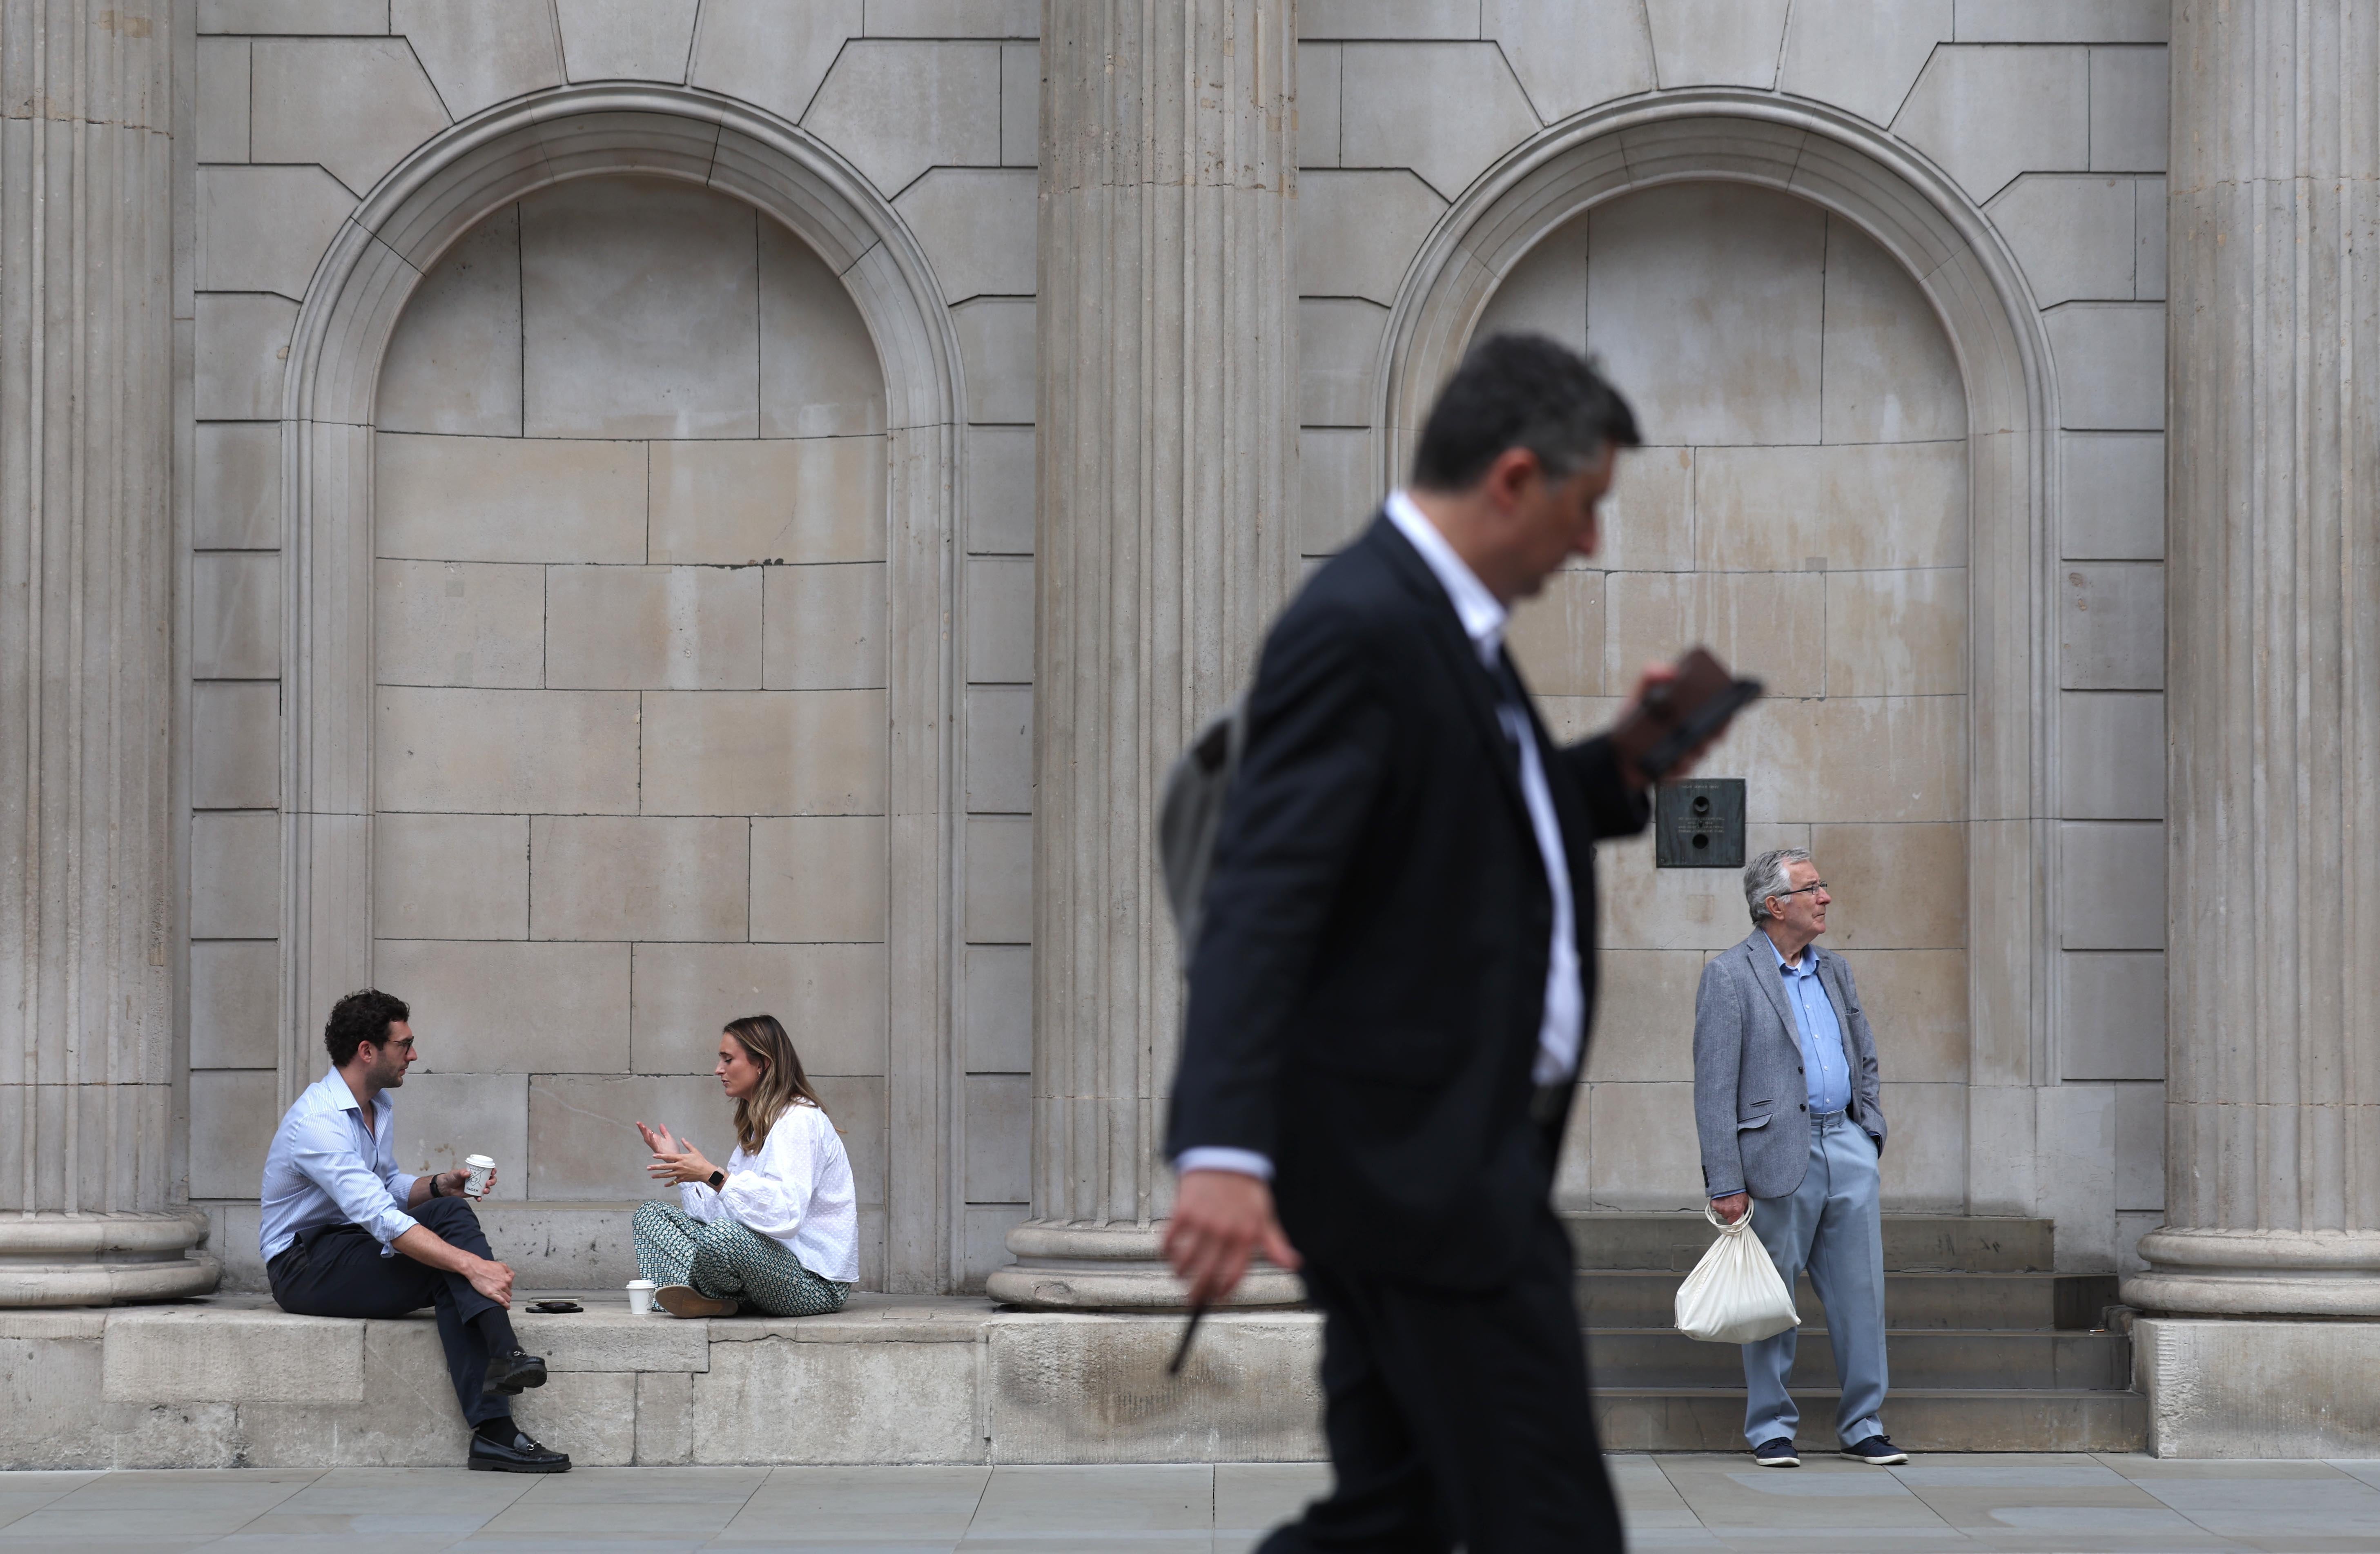 People walk past the Bank of England in the City of London financial district